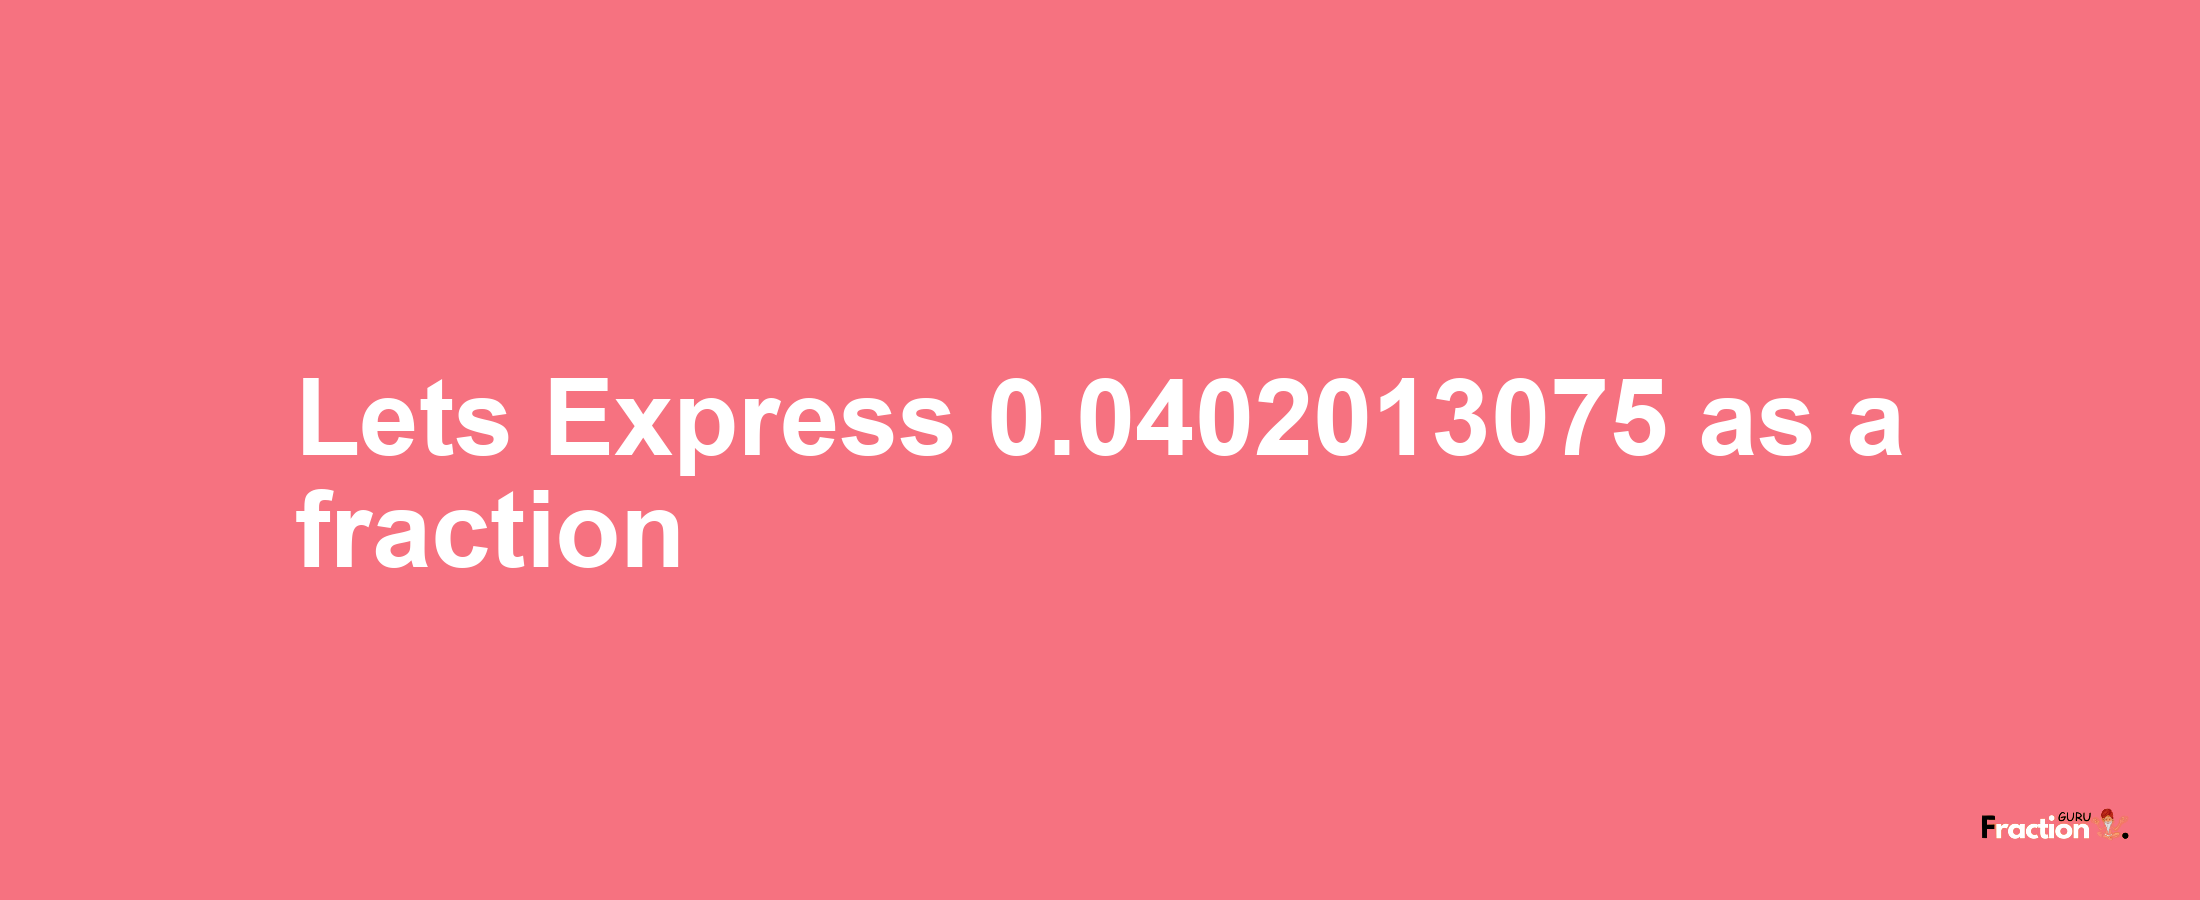 Lets Express 0.0402013075 as afraction